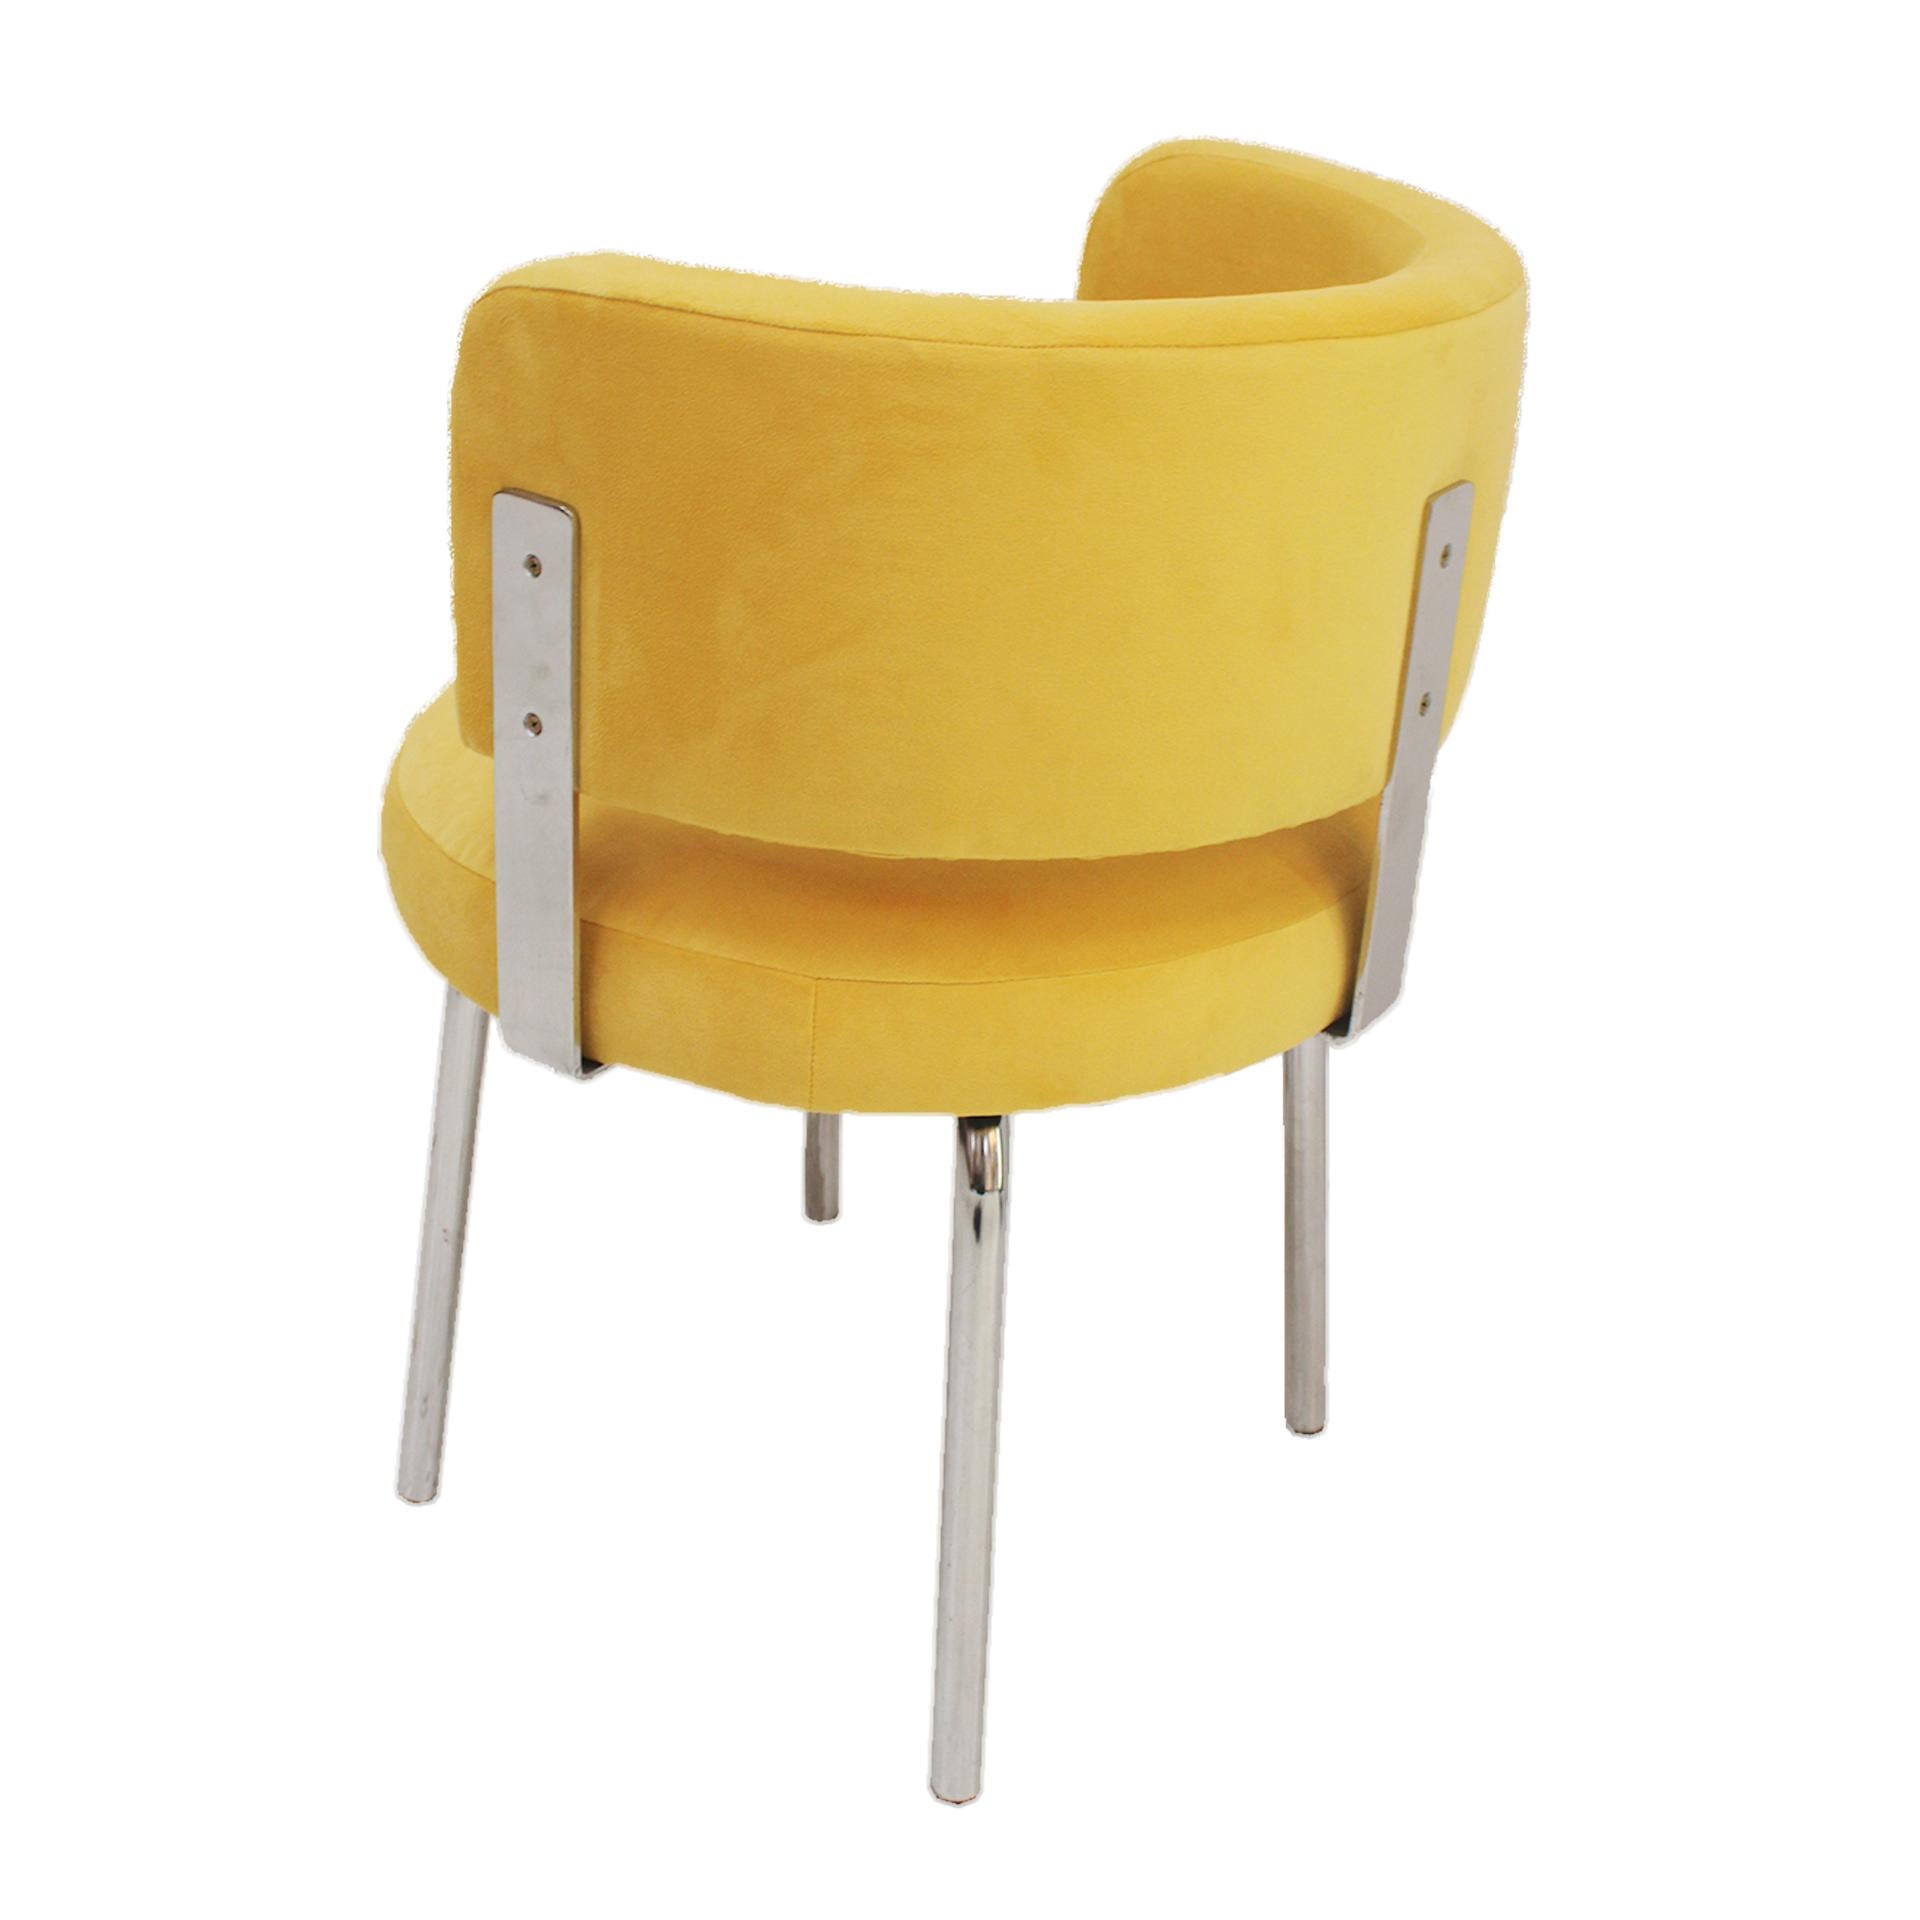 Late 20th Century Pair of Bauhaus Style Chairs for Pizzi Arredamenti Upholstered in Yellow Cotton  For Sale